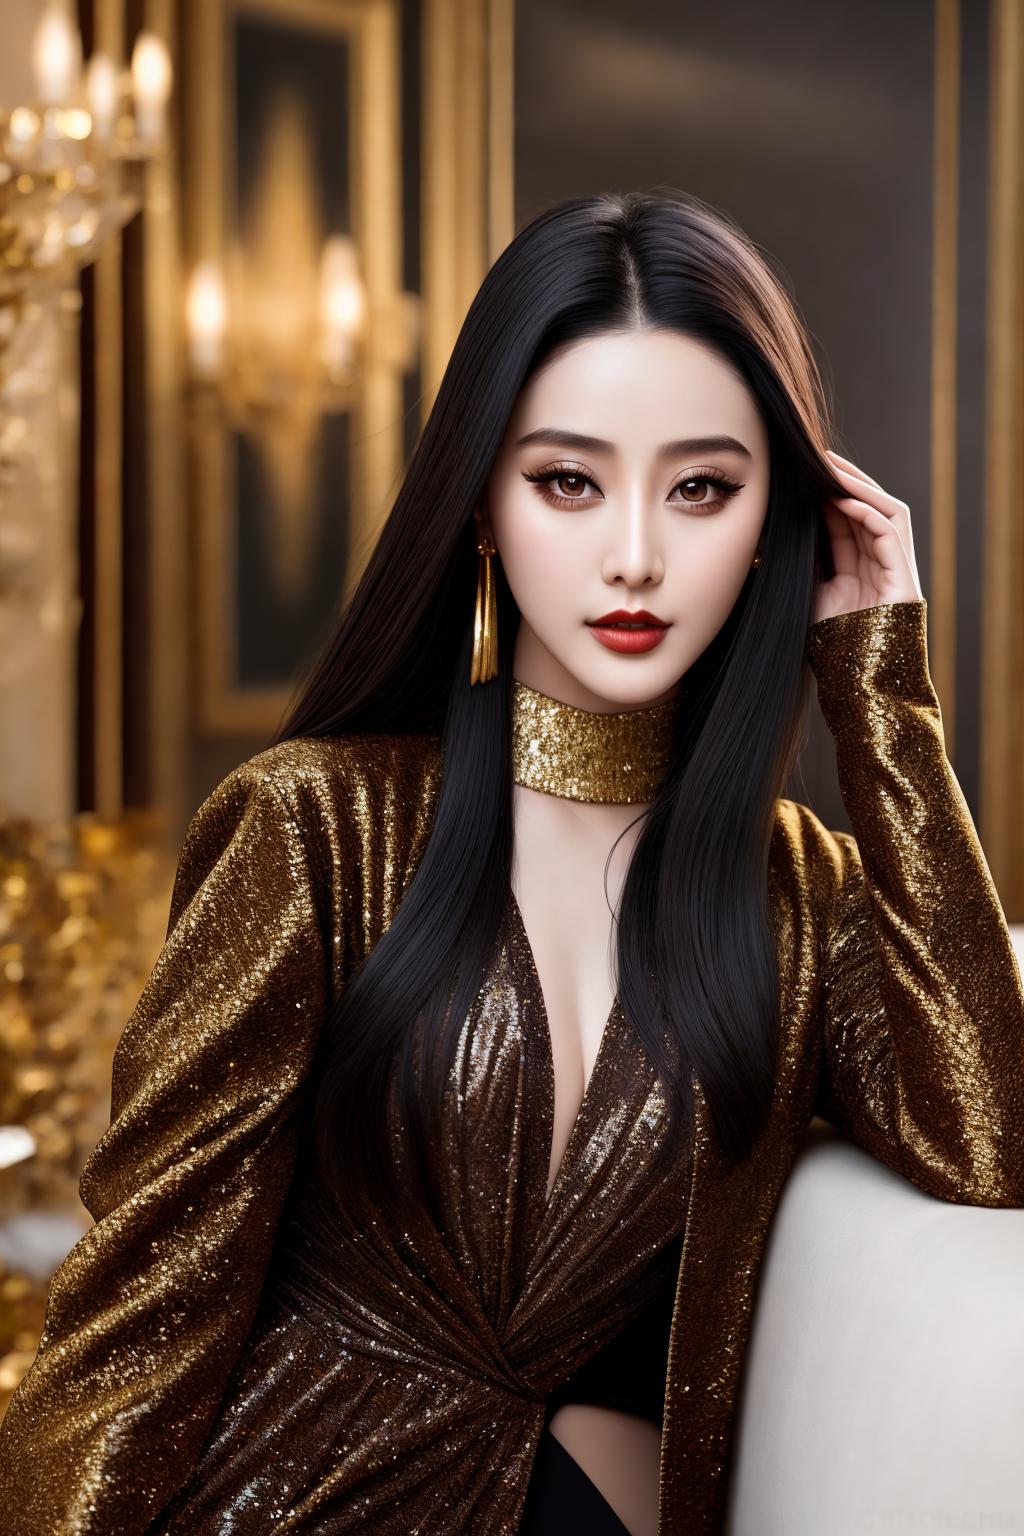 Haute Couture | Fan Bingbing 范冰冰 style fashion image by EDG